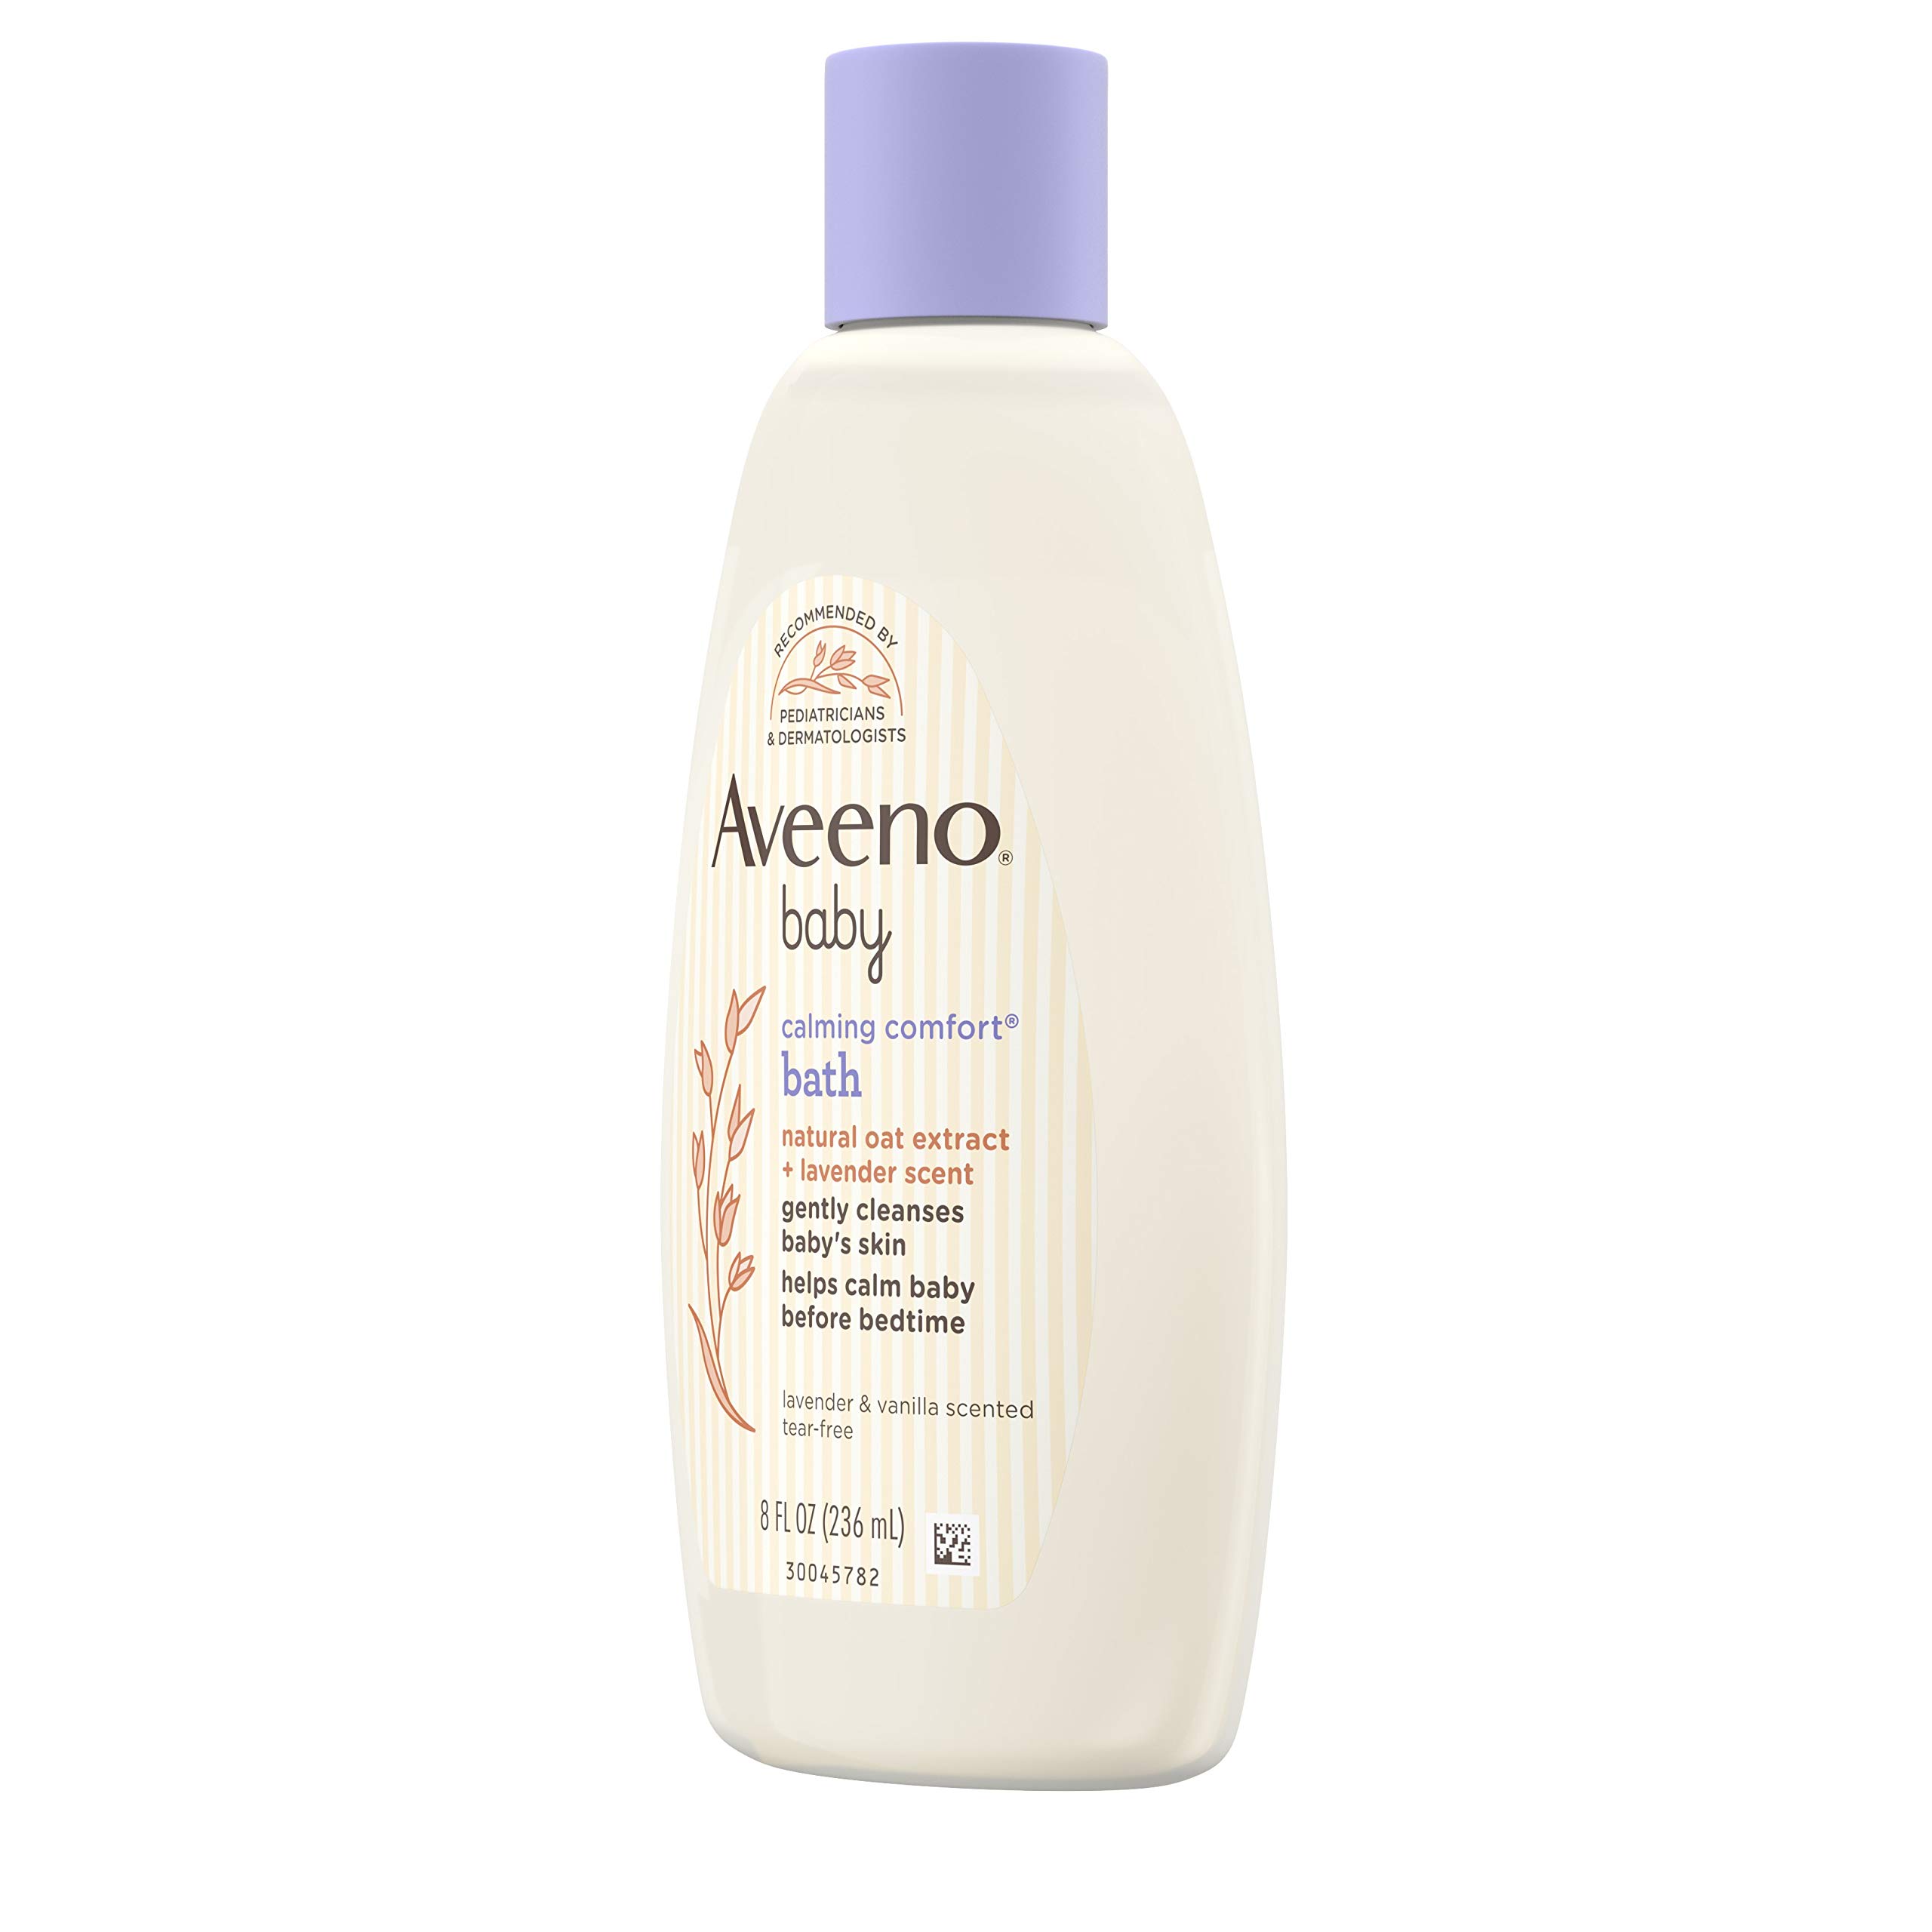 Aveeno Baby Calming Comfort Bath & Wash with Relaxing Lavender & Vanilla Scents & Natural Oat Extract, Hypoallergenic & Tear-Free Formula, Paraben-, Phthalate- & Soap-Free, 8 fl. Oz